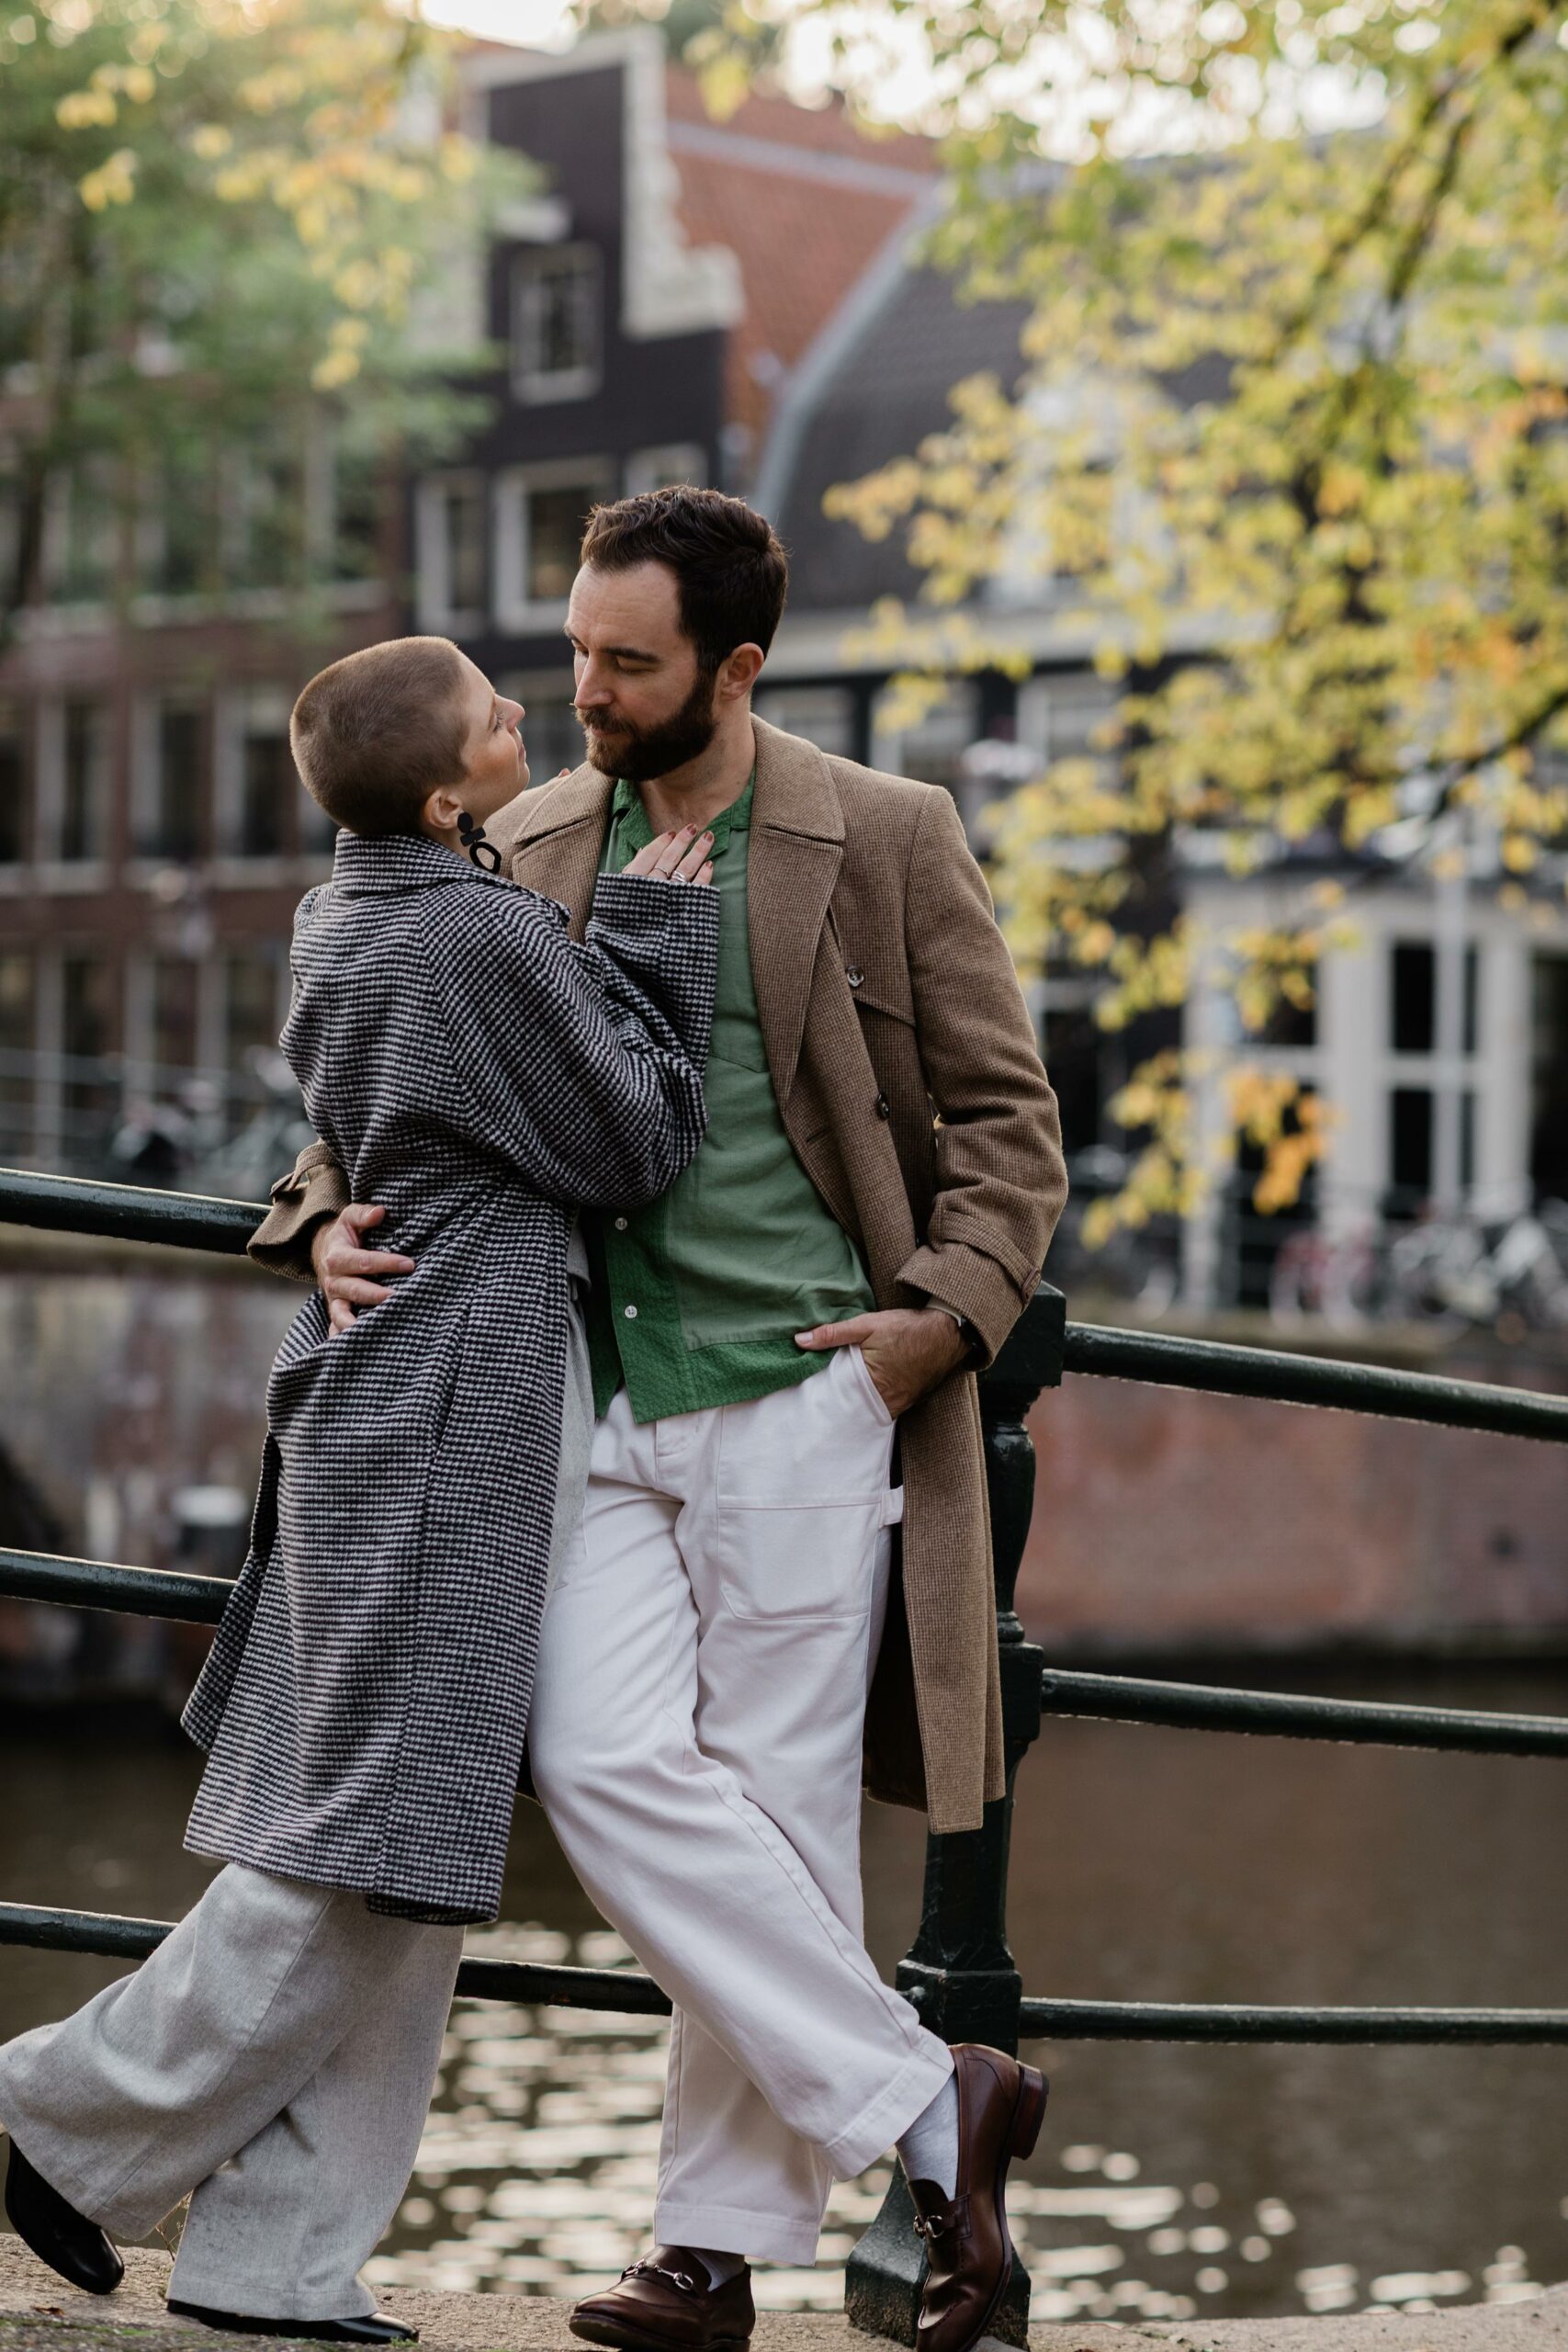 alt="beautiful couple by Amsterdam canal on Brouwersgracht"